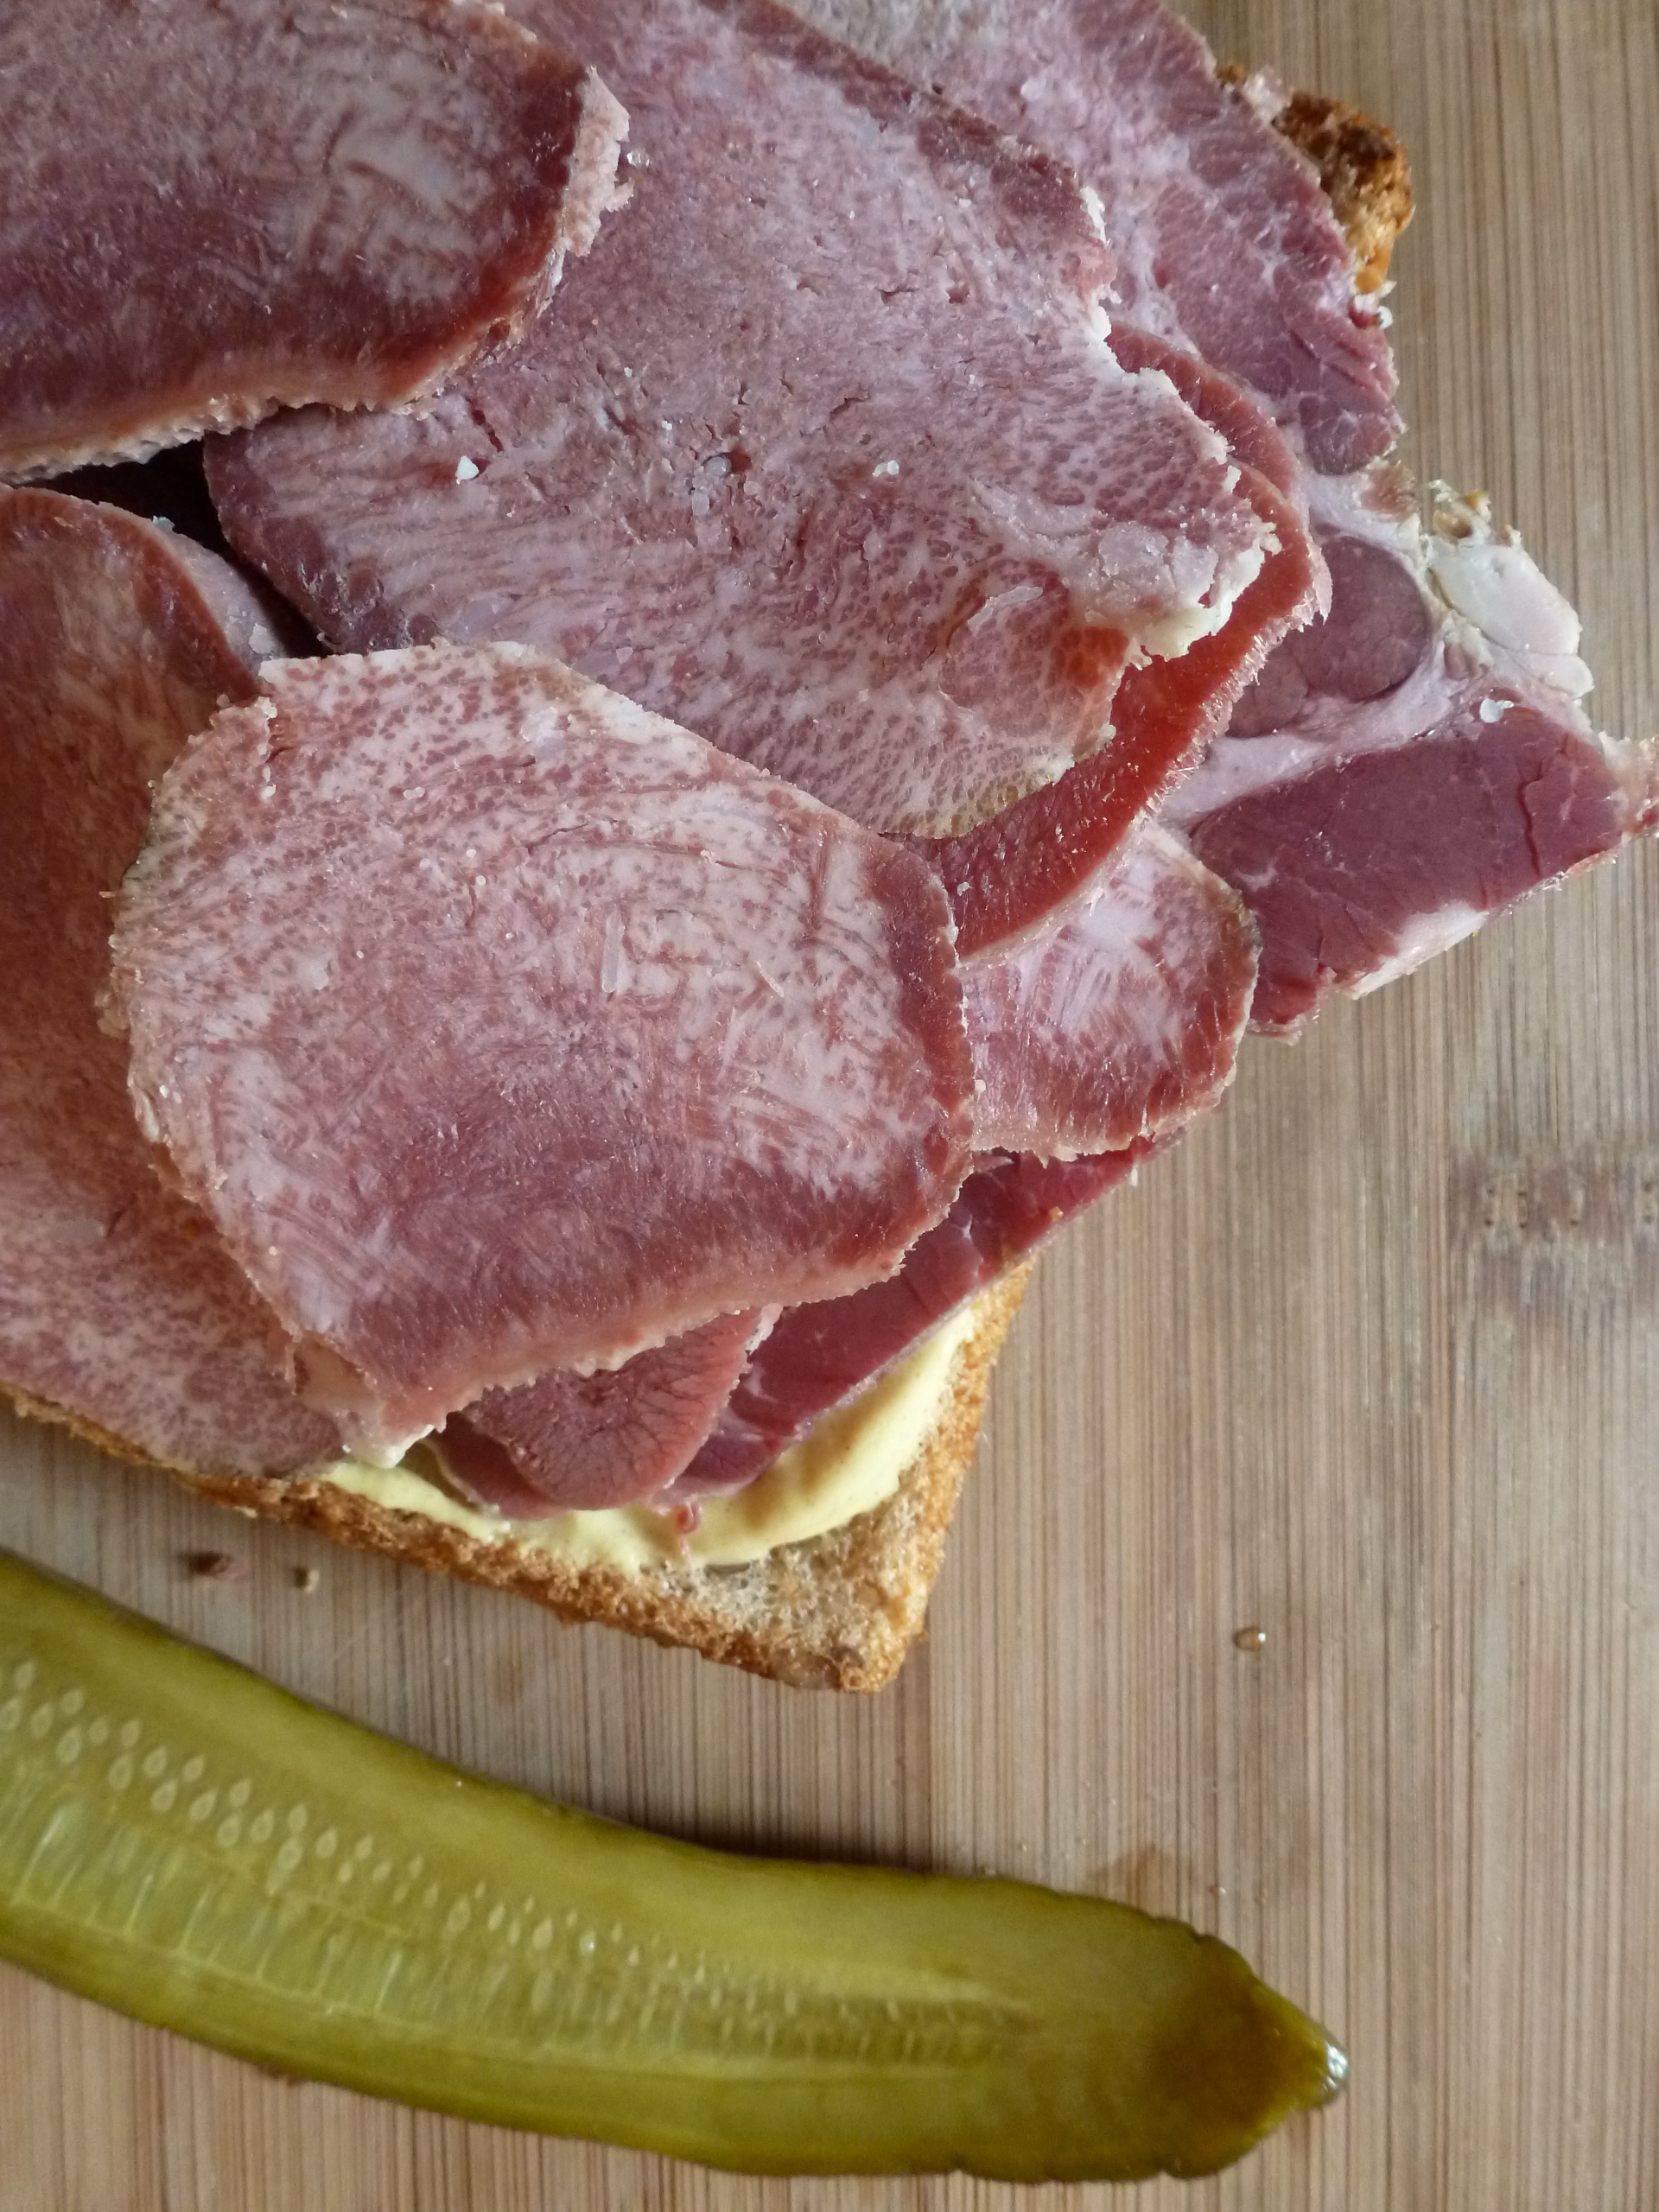 Smoked beef tongue sandwich, with dill pickle